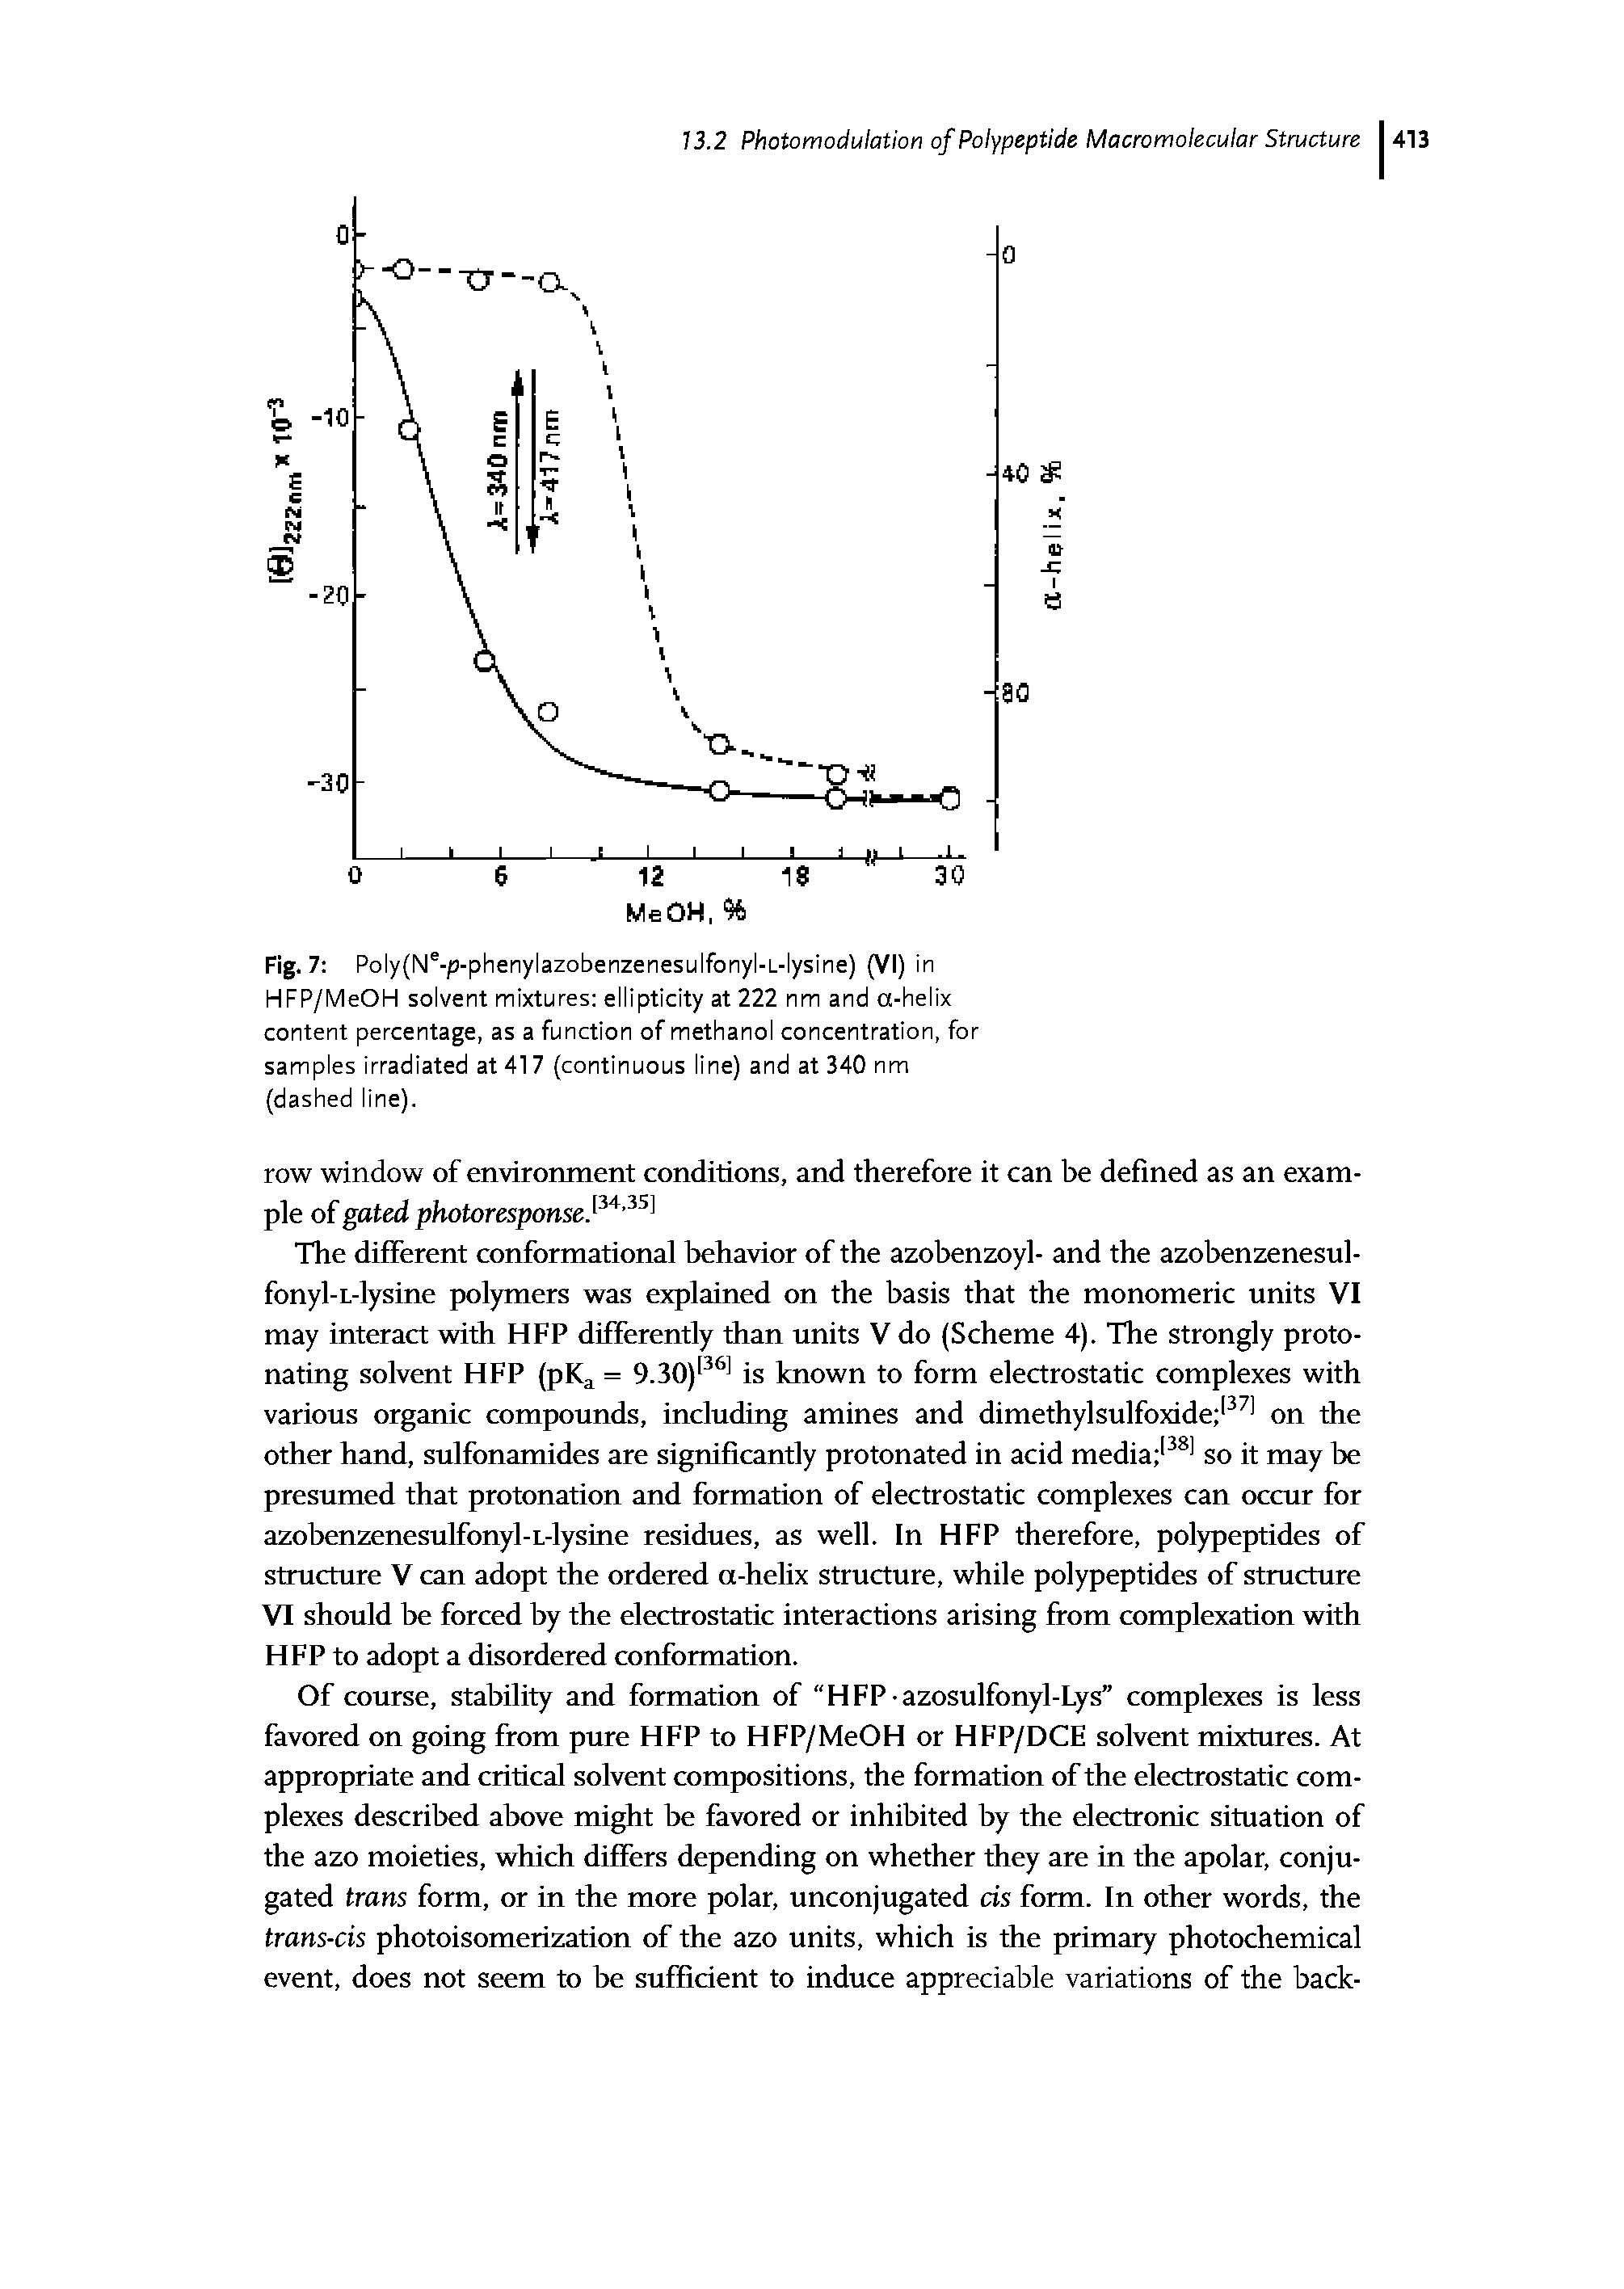 Fig. 7 Poly(Ne-p-phenylazobenzenesulfonyl-L-lysine) (VI) in HFP/MeOH solvent mixtures ellipticity at 222 nm and a-helix content percentage, as a function of methanol concentration, for samples irradiated at 417 (continuous line) and at 340 nm (dashed line).